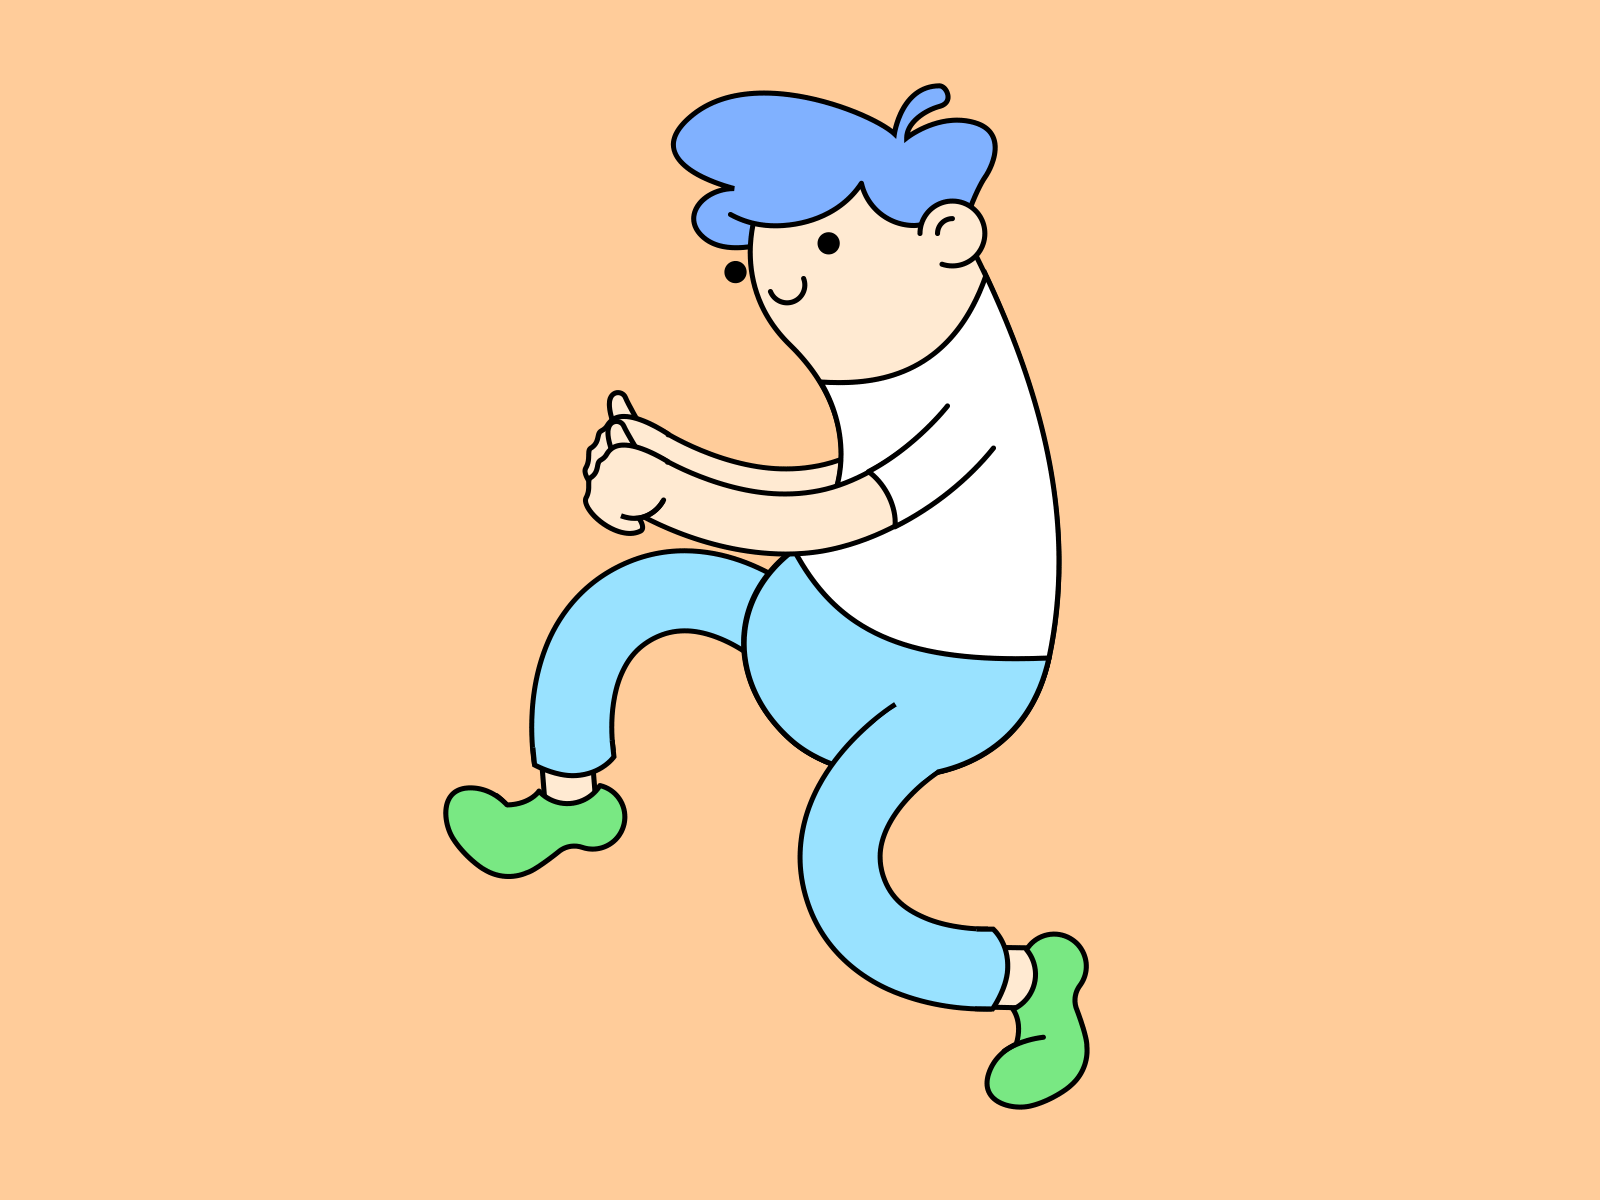 running man dance style aftereffects animation colorful flat illustration loop animation vector